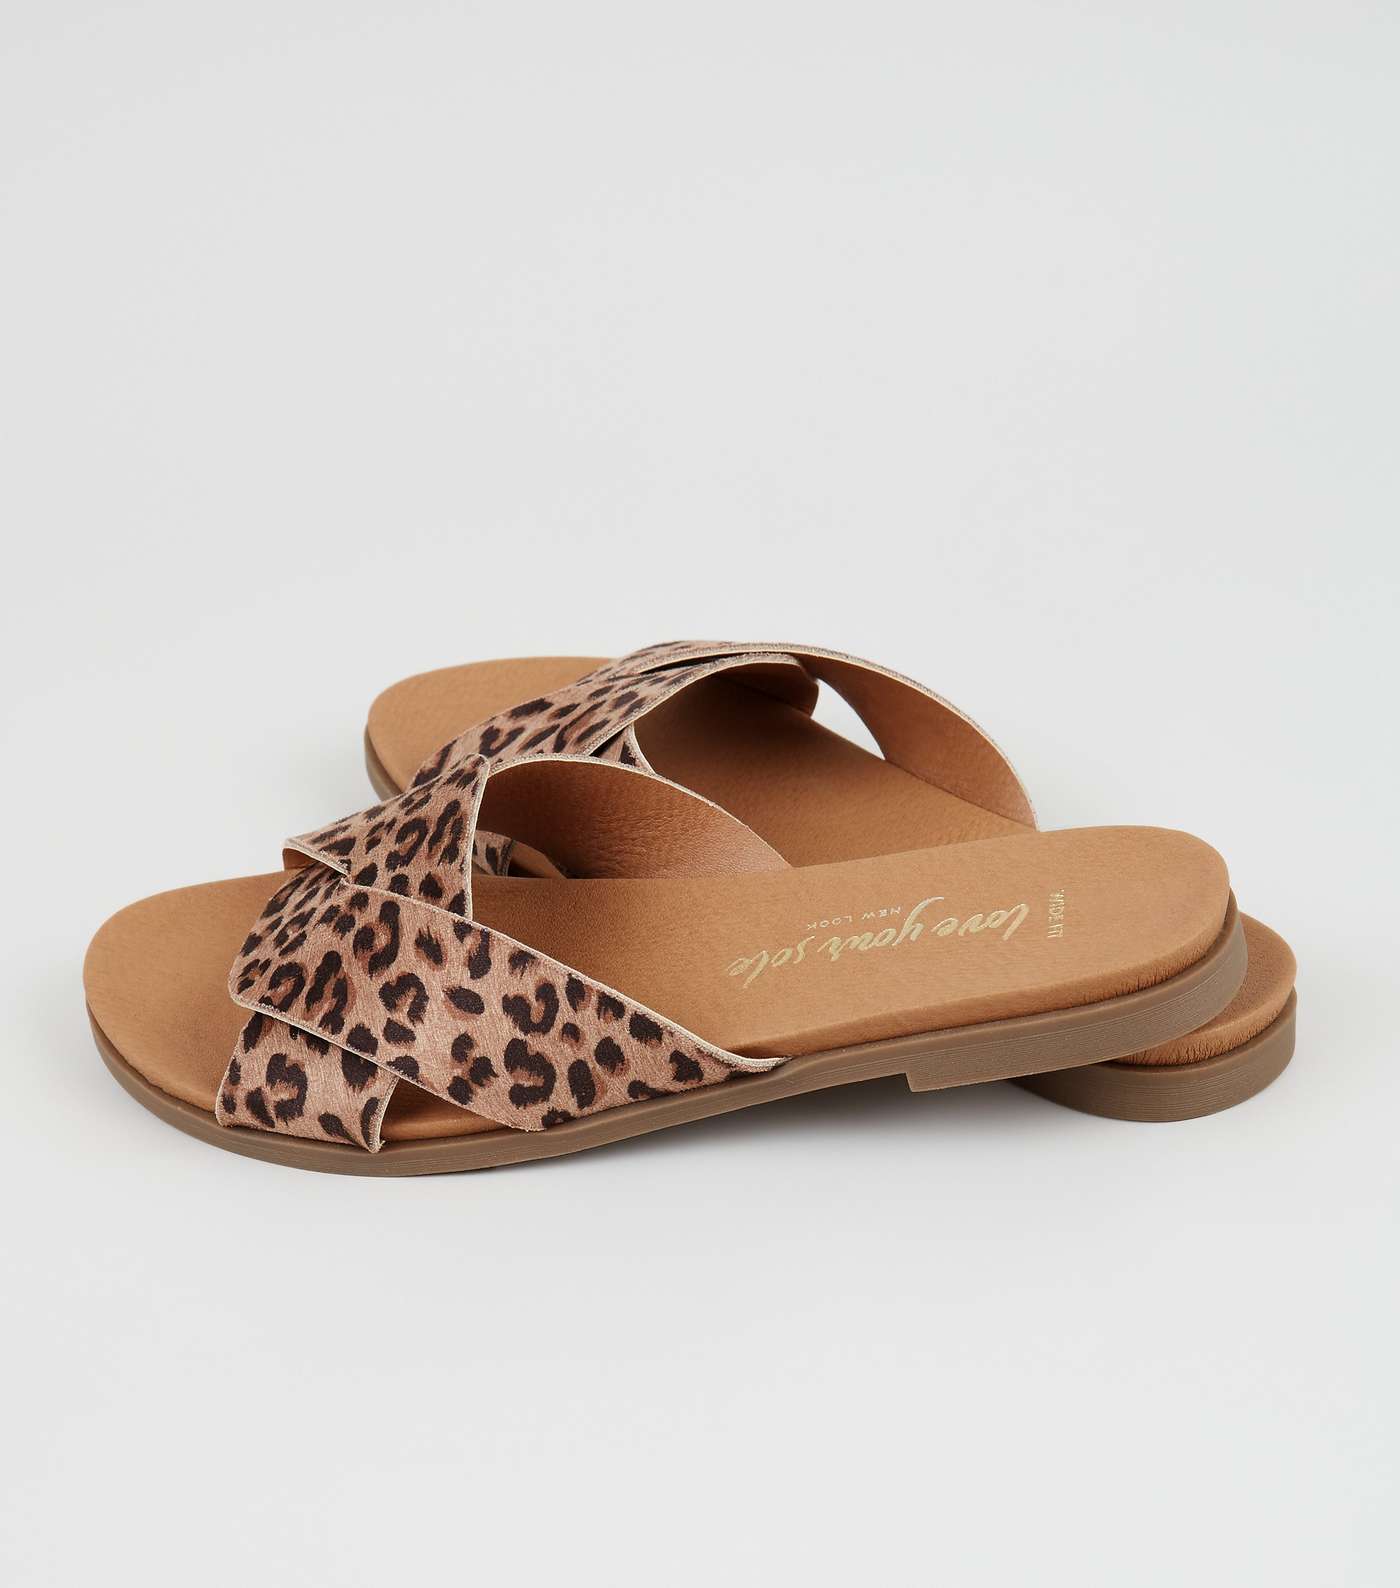 Wide Fit Stone Leopard Print Footbed Sliders Image 5